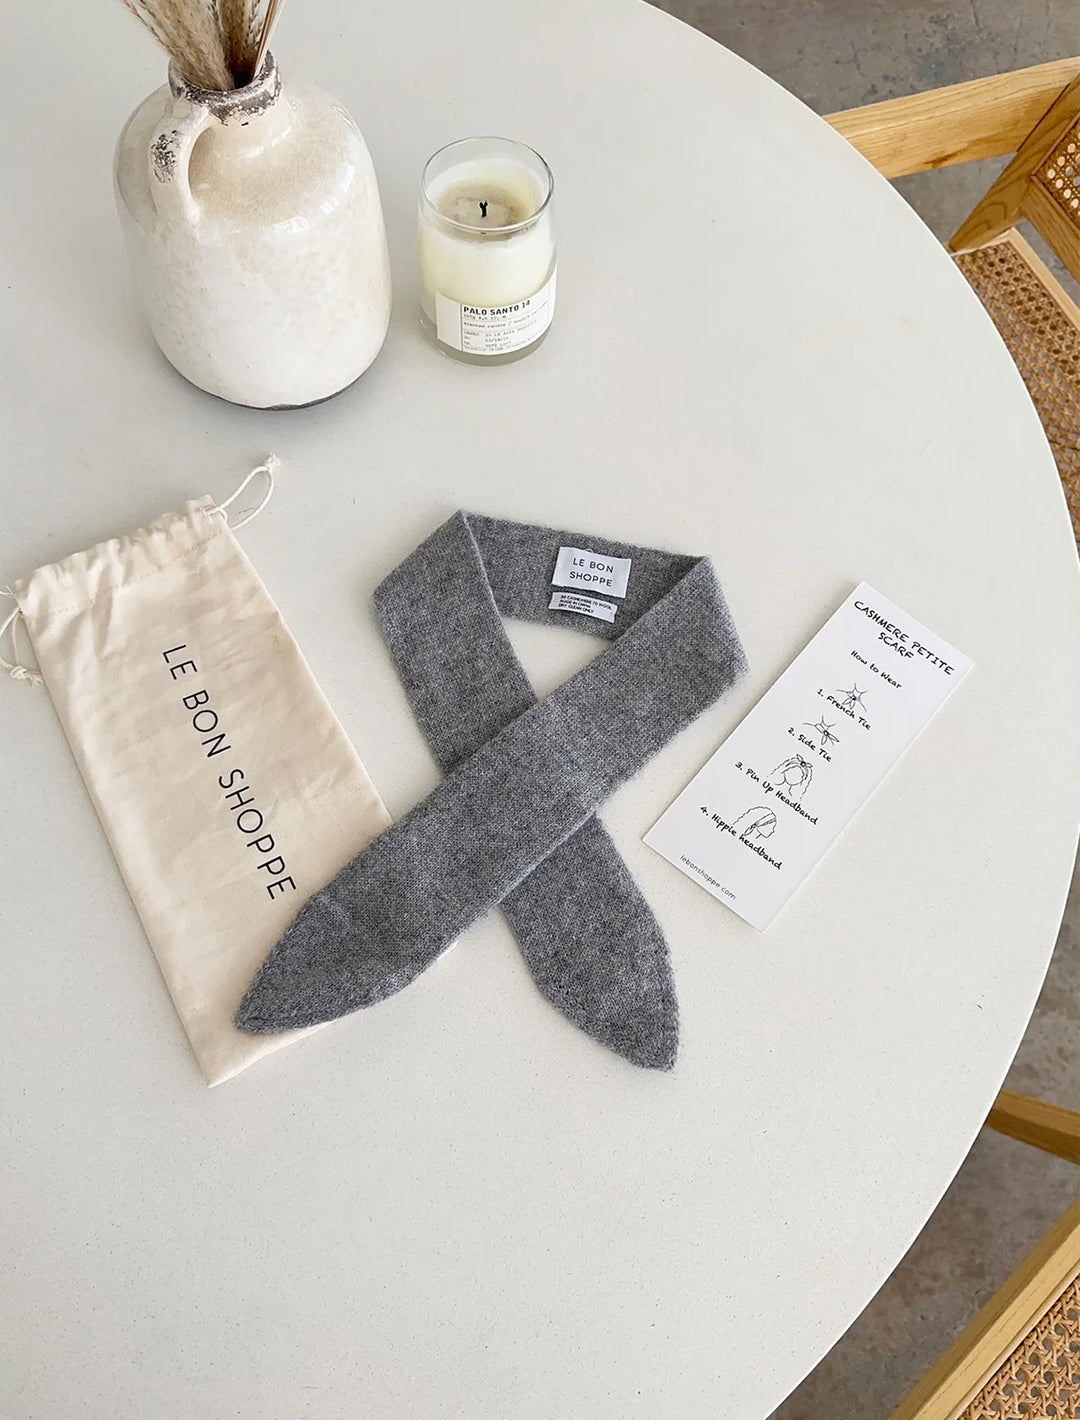 Flat lay of Le Bon Shoppe's classic cashmere skinny scarf in grey.